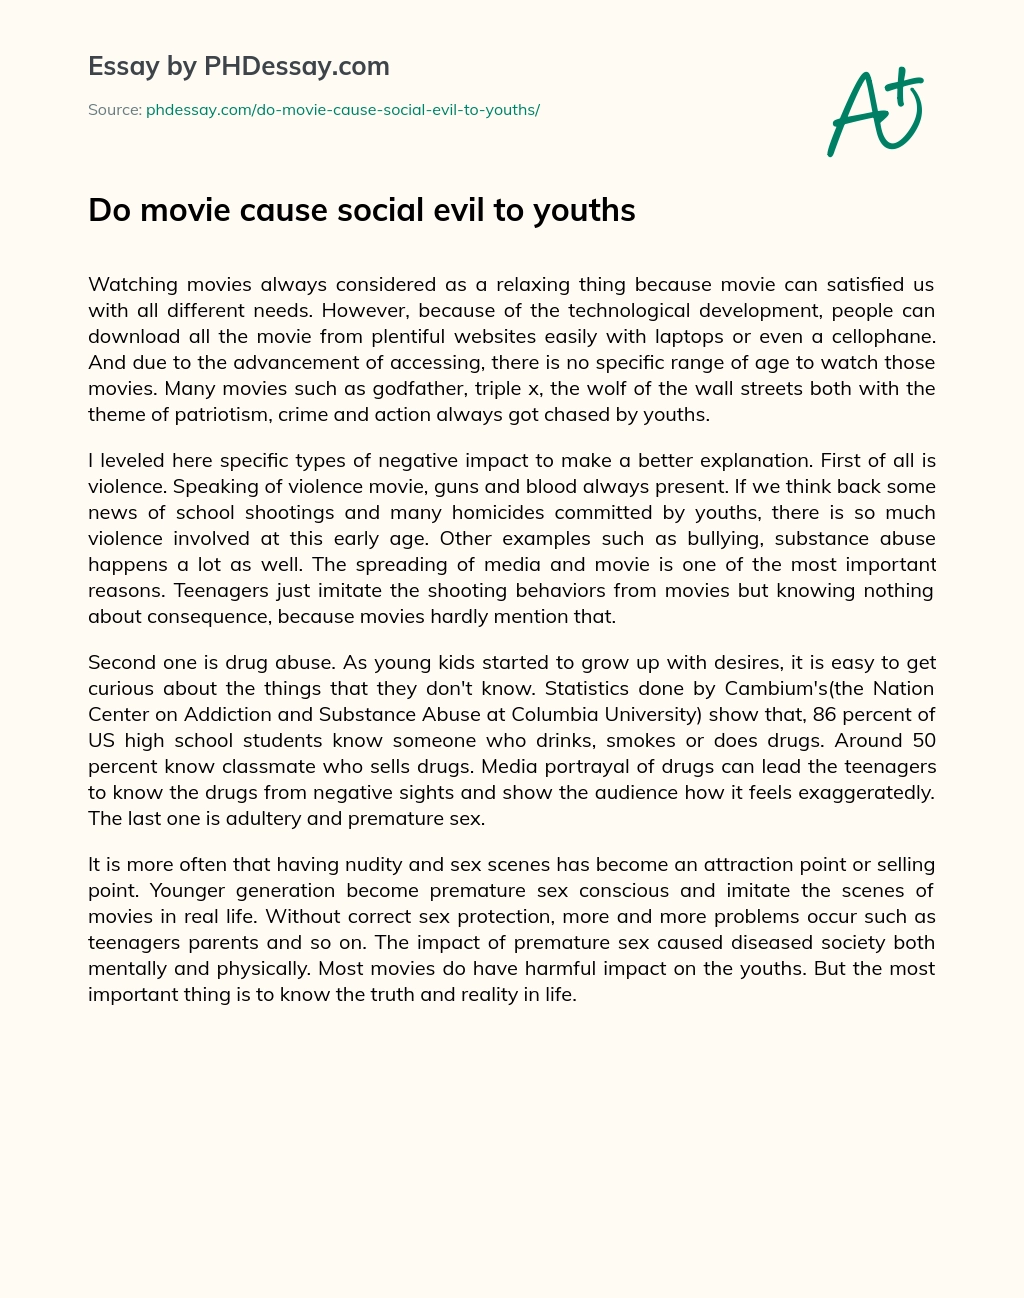 Do movie cause social evil to youths essay